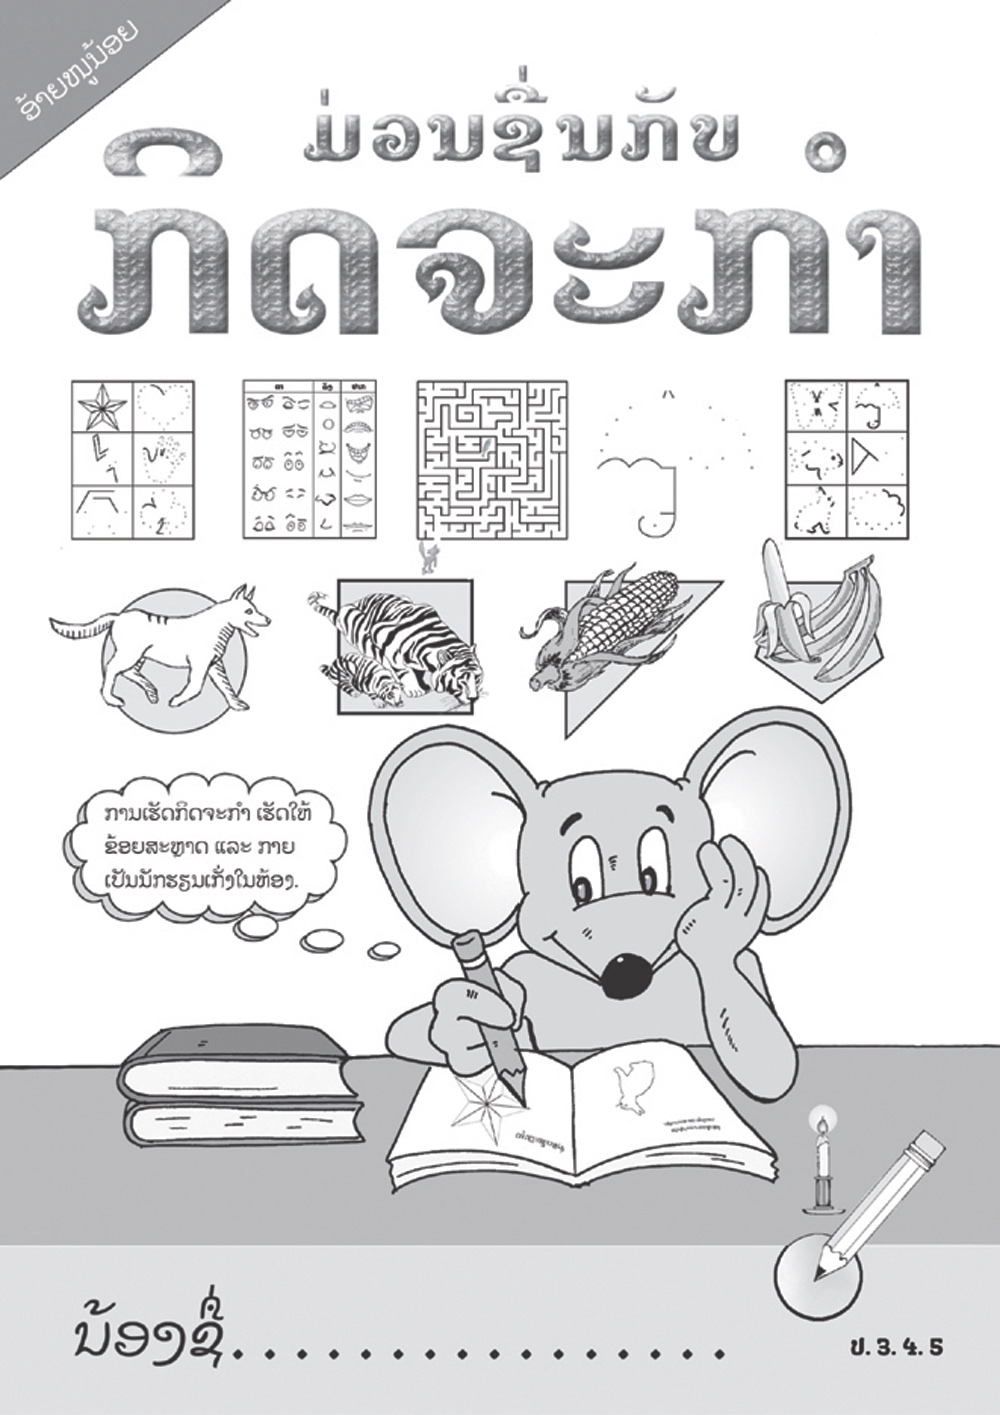 Activity Book Grades 3-5 large book cover, published in Lao language